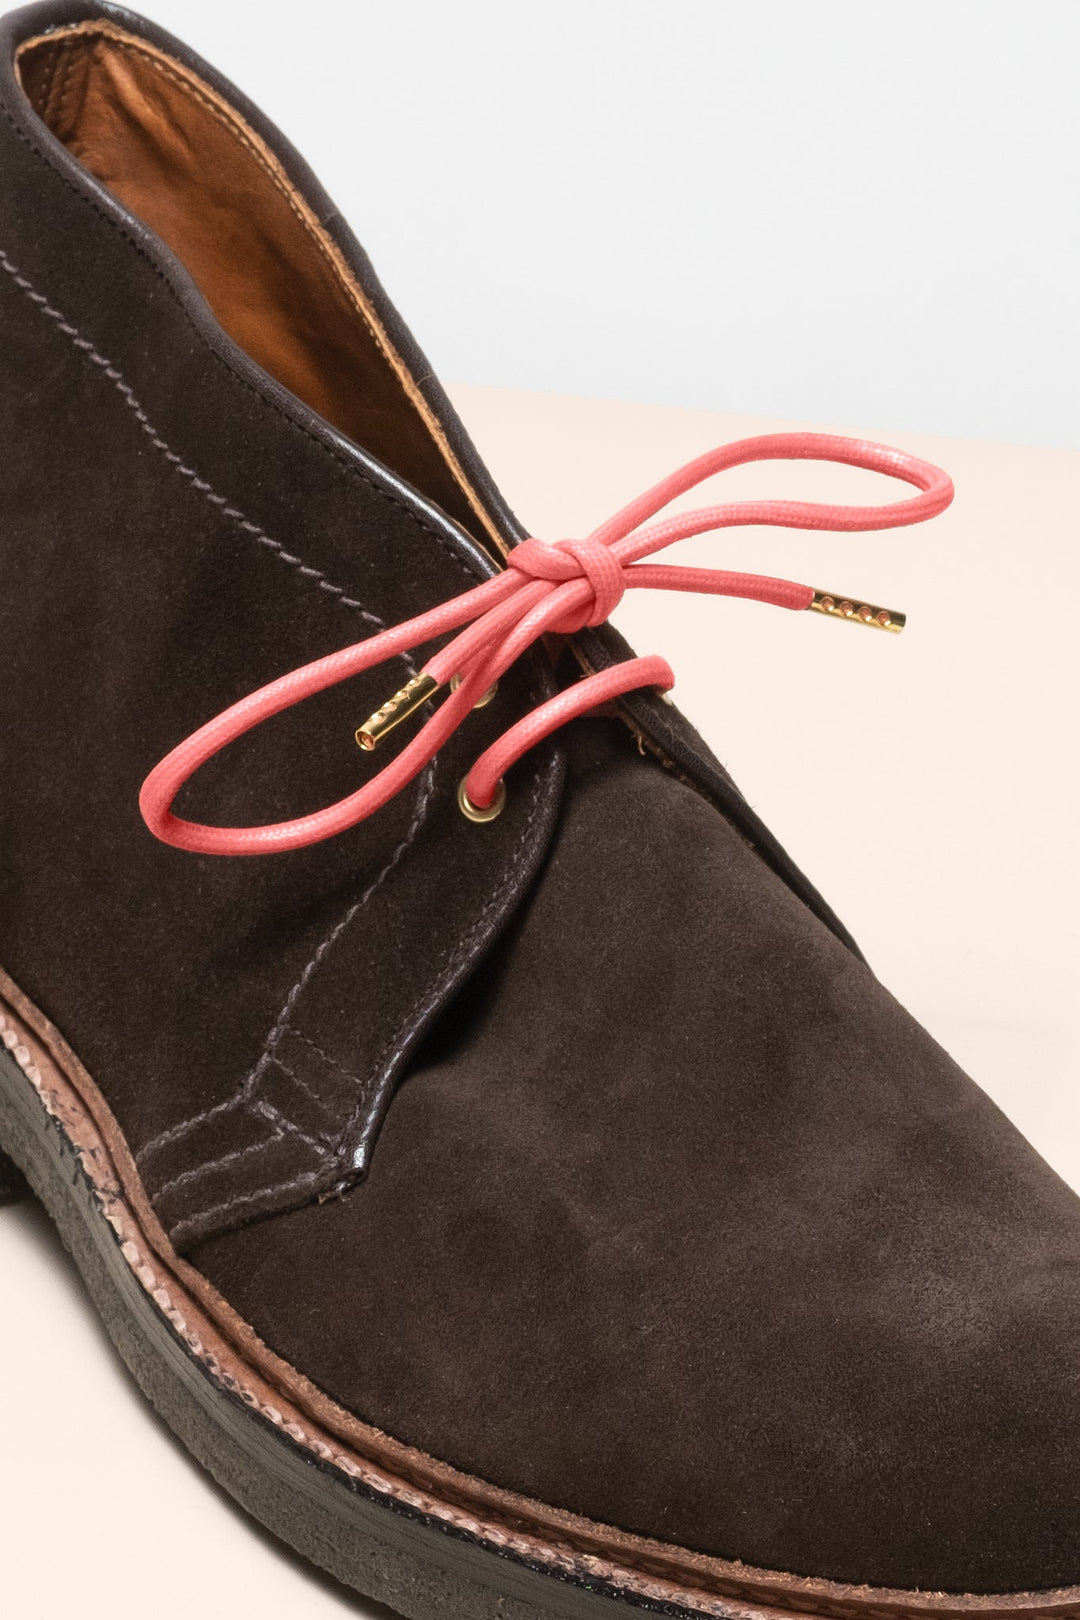 Salmon - 4mm round waxed shoelaces for boots and shoes made from 100% organic cotton - Senkels